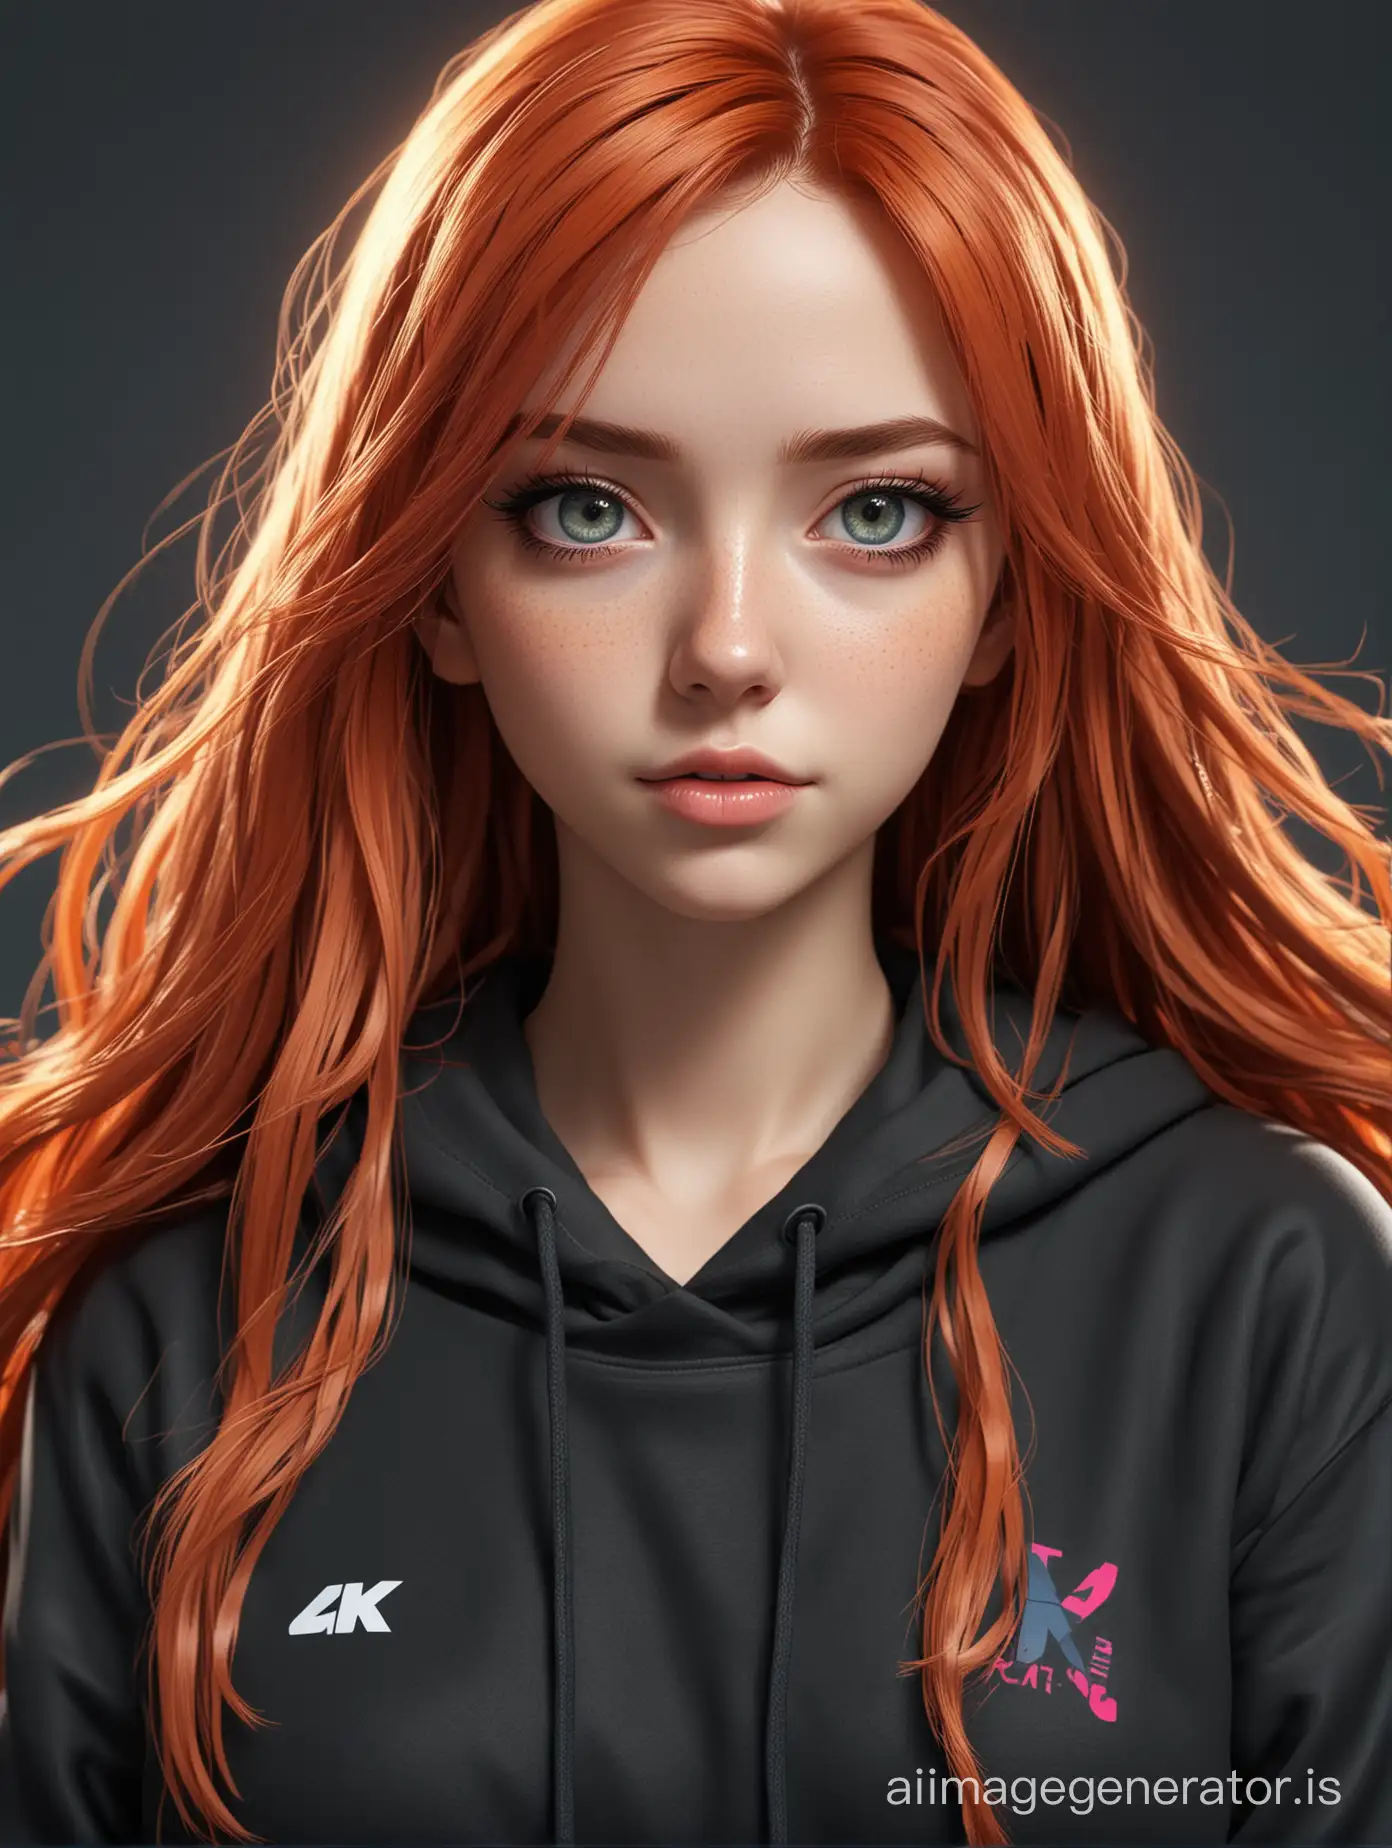 UltraDetailed-Anime-Woman-with-Long-Vibrant-Red-Hair-in-Black-Sweatshirt